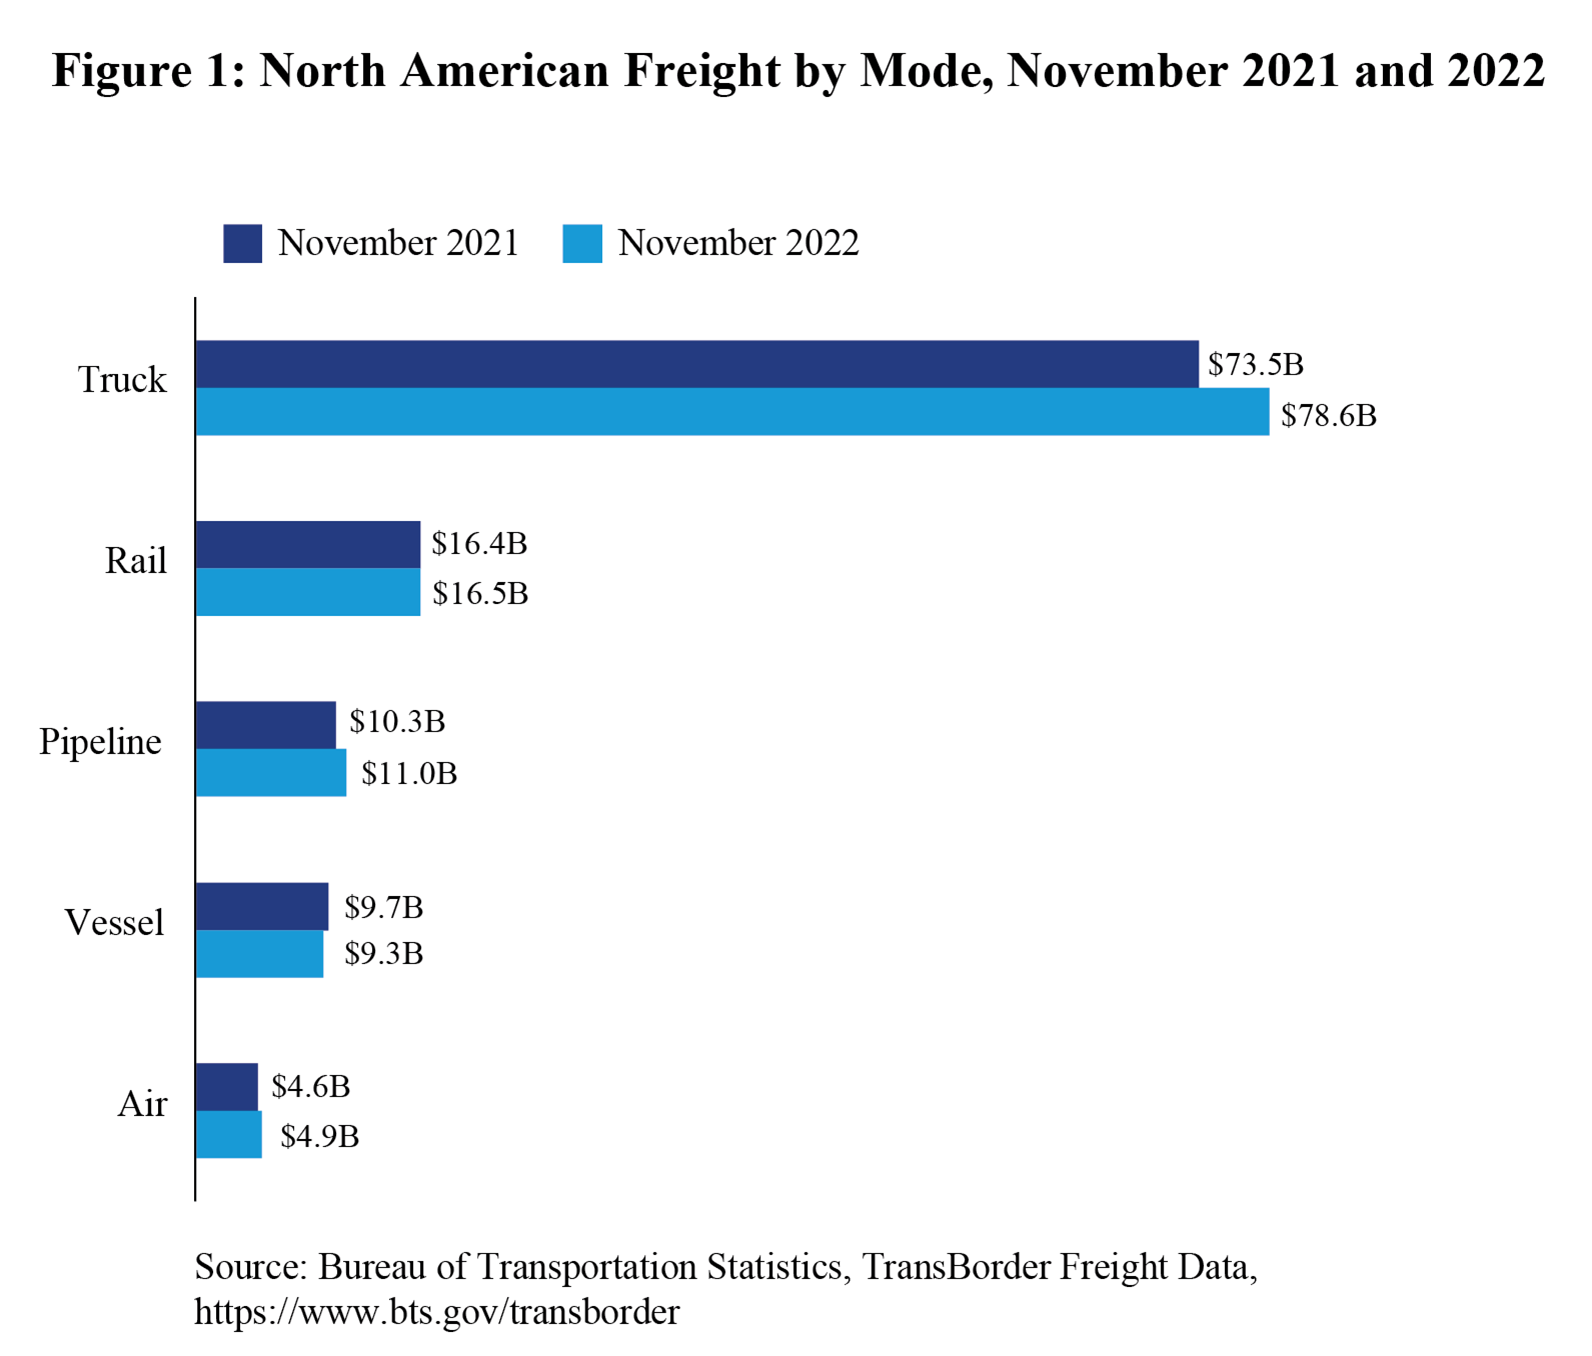 Bar chart displaying North American Freight by mode for November 2021 and 2022